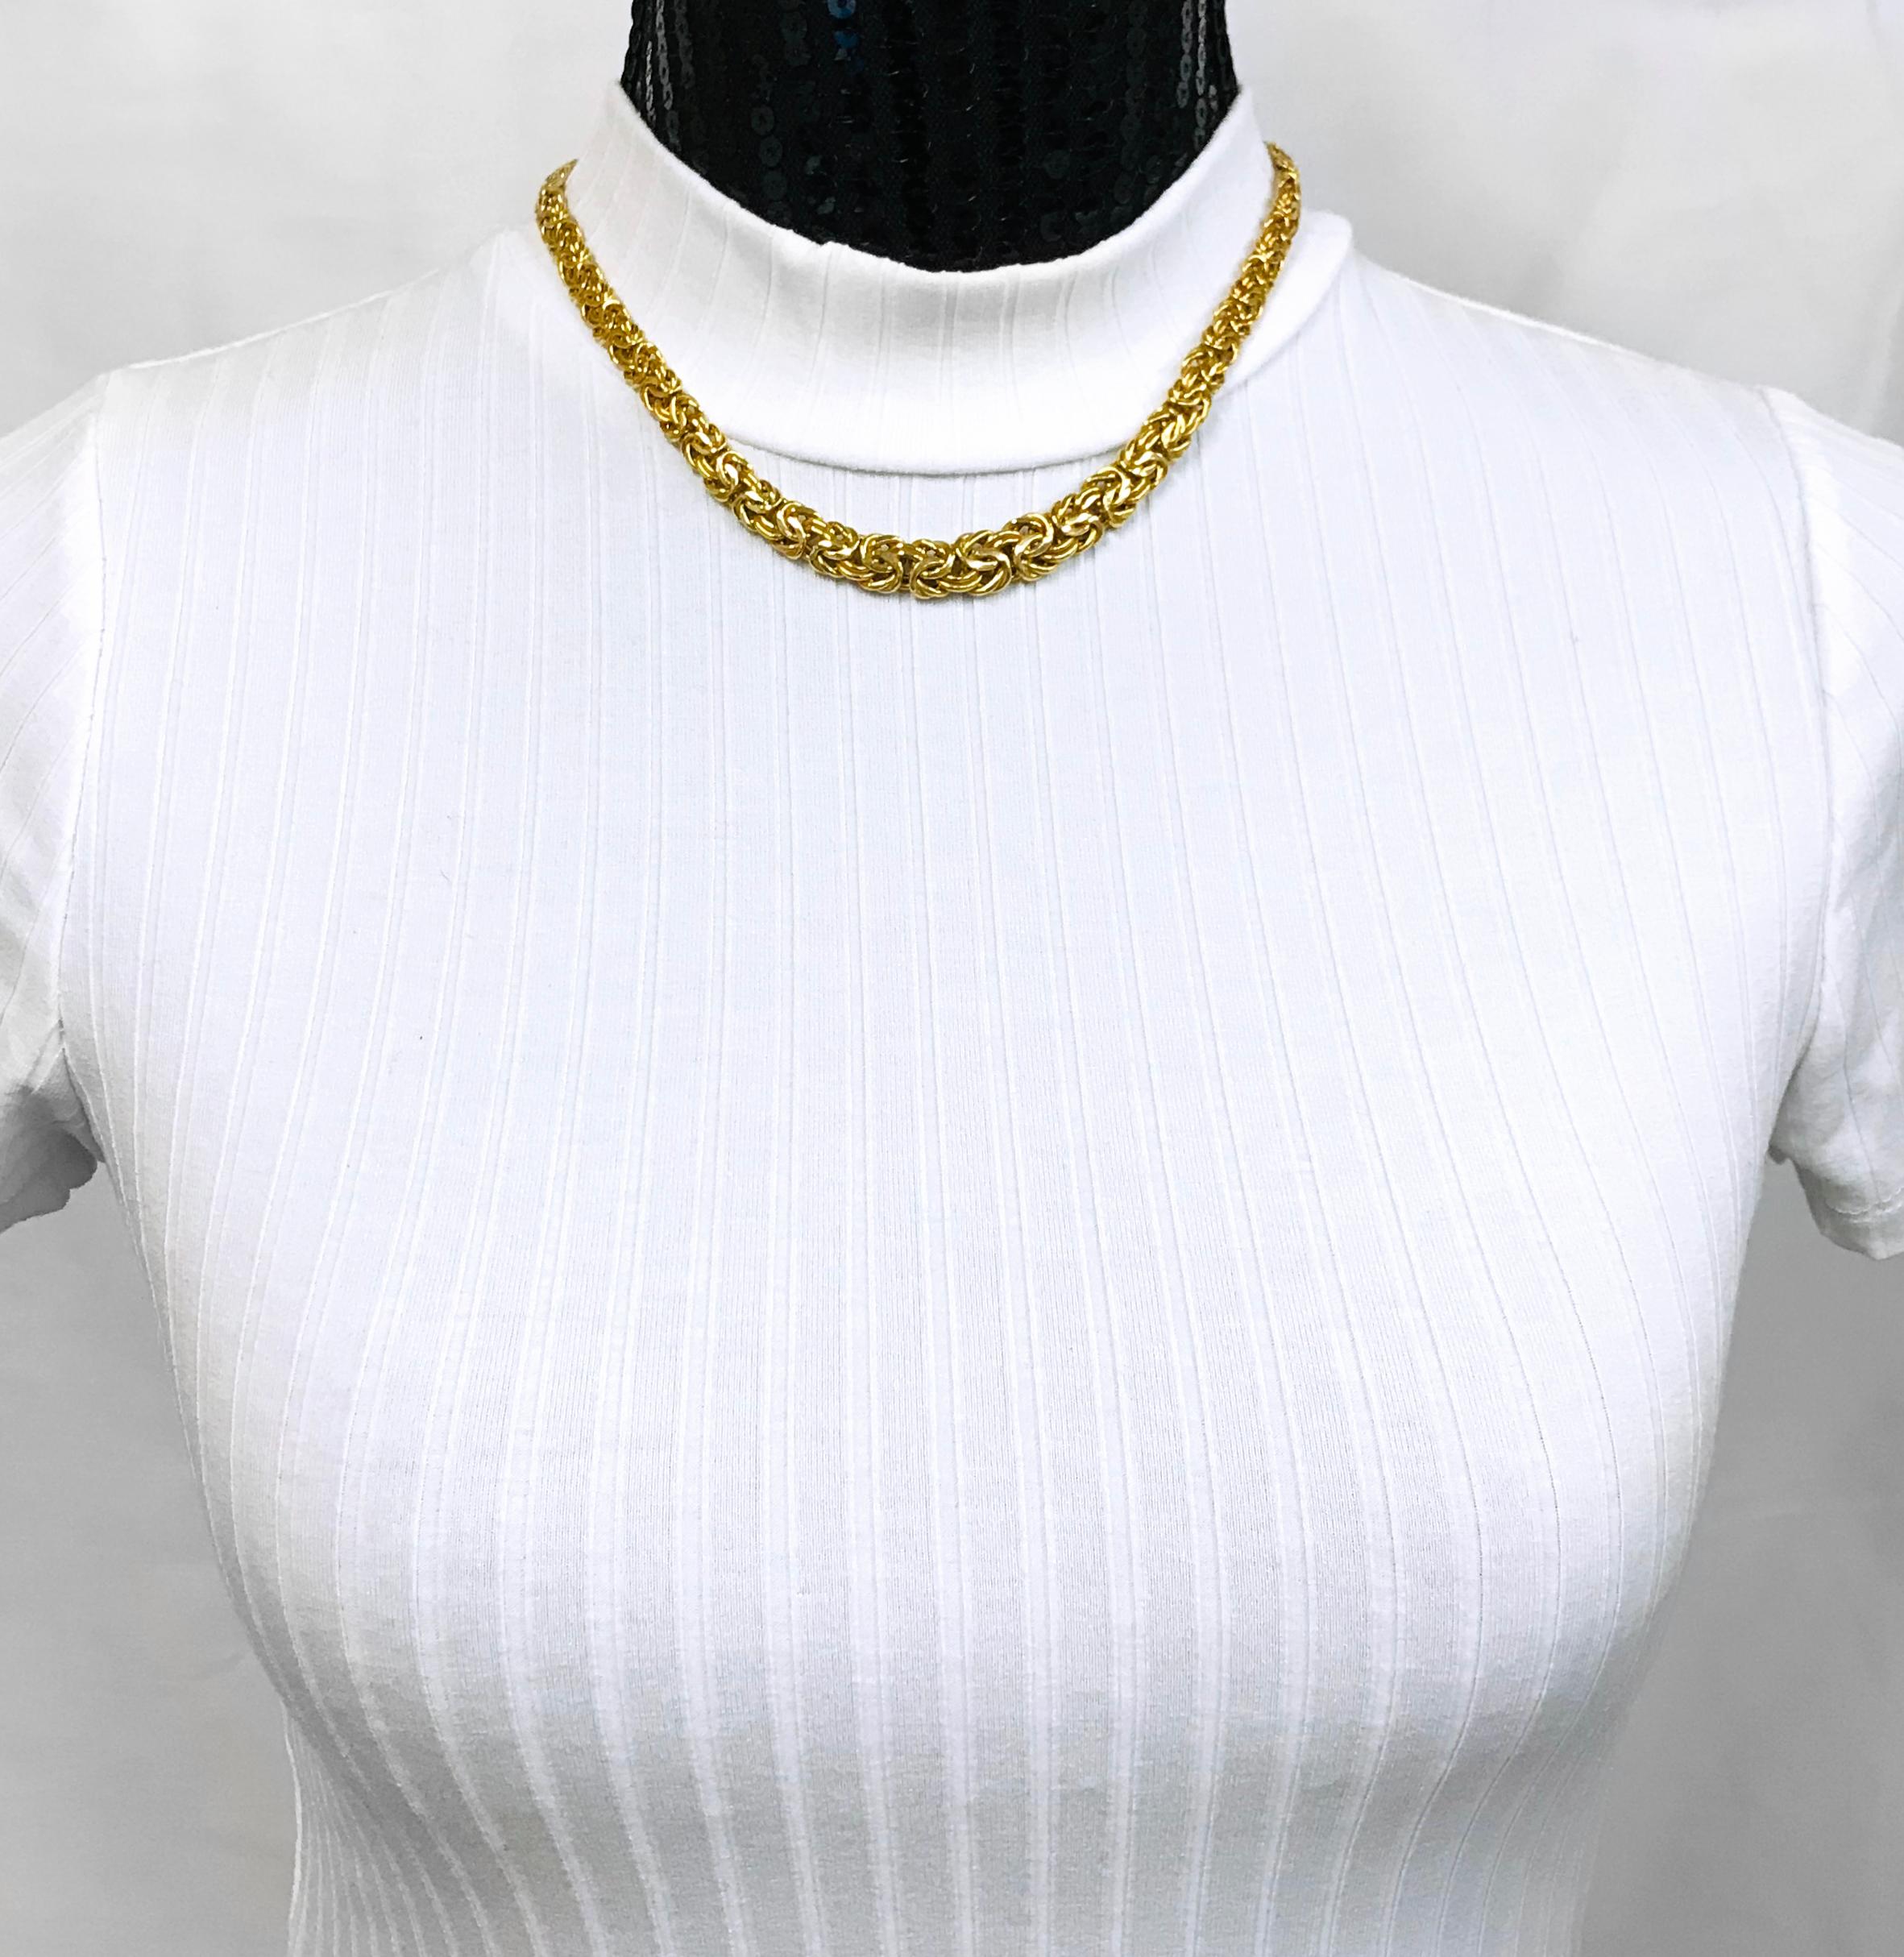 14 Karat Gold Byzantine Tapered Necklace In Fair Condition For Sale In Palm Desert, CA